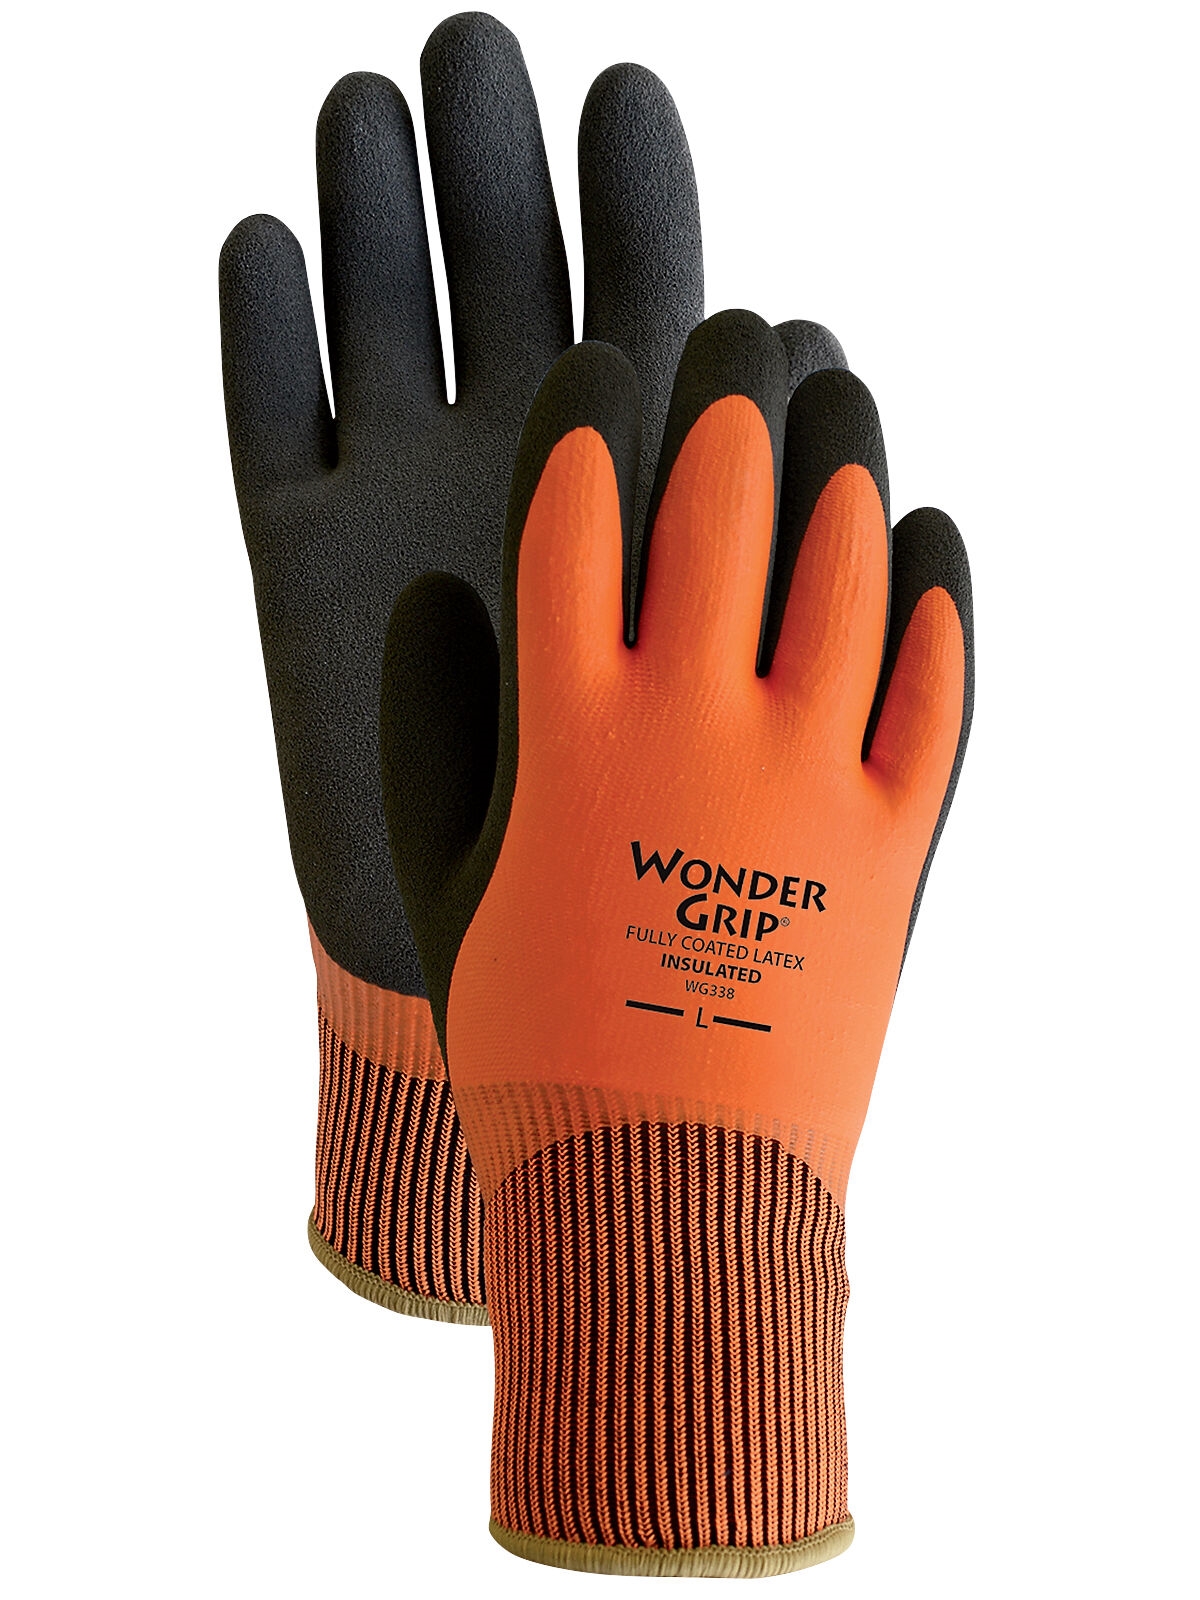 Safety Gloves Waterproof Fully Coated Black Nitrile Gardening Gloves All SIzes 